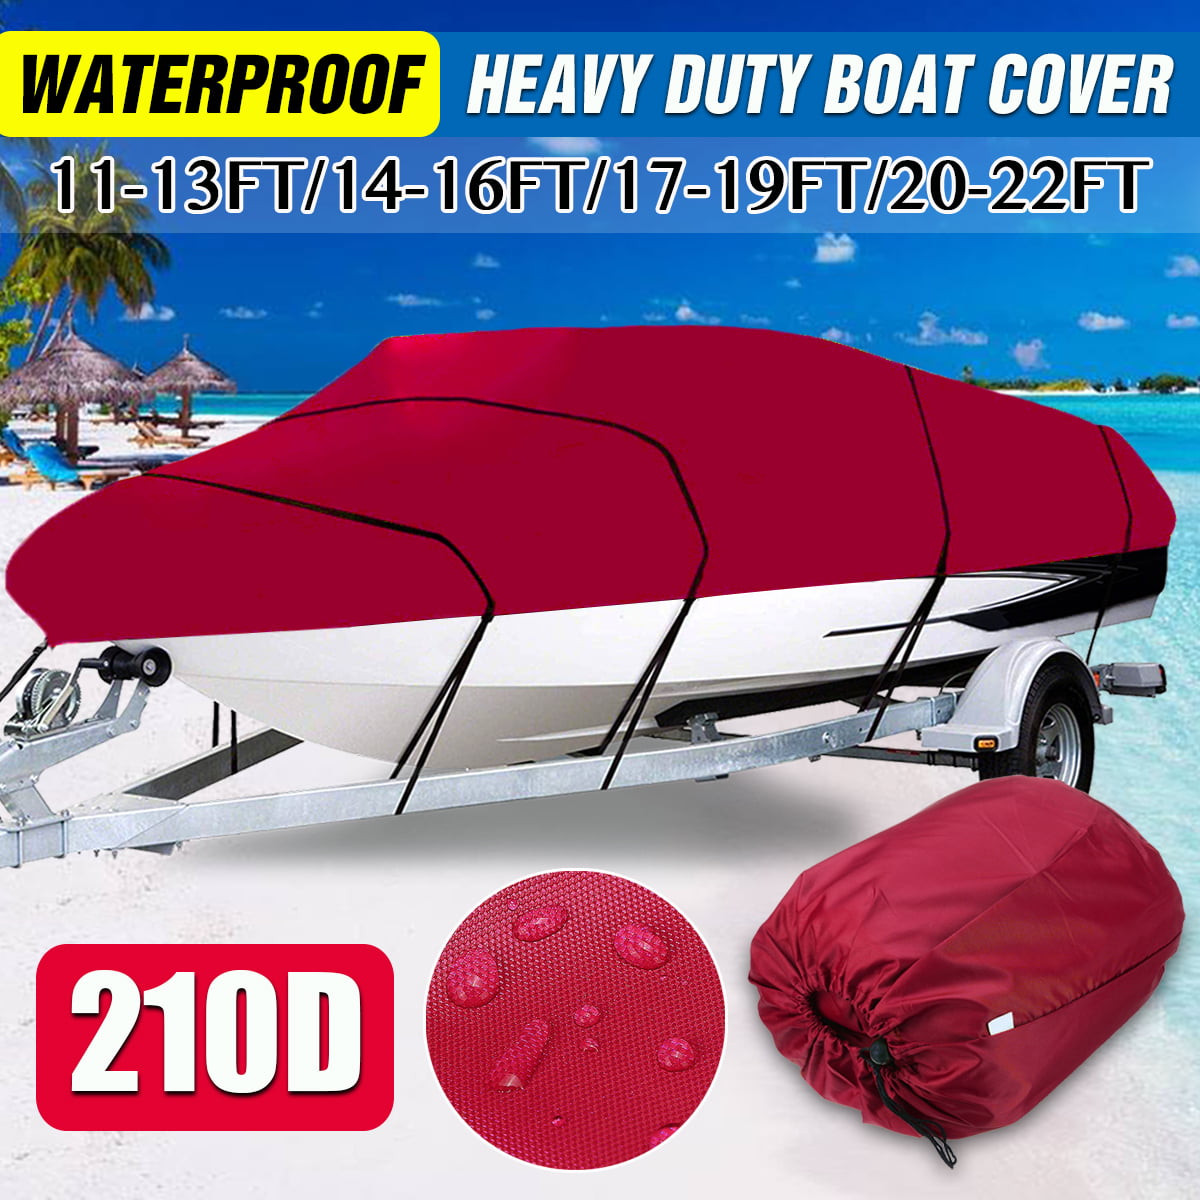 11-22FT Waterproof Boat Cover Runabout Fish Ski V-Hull Marine Speedboat Outdoor 